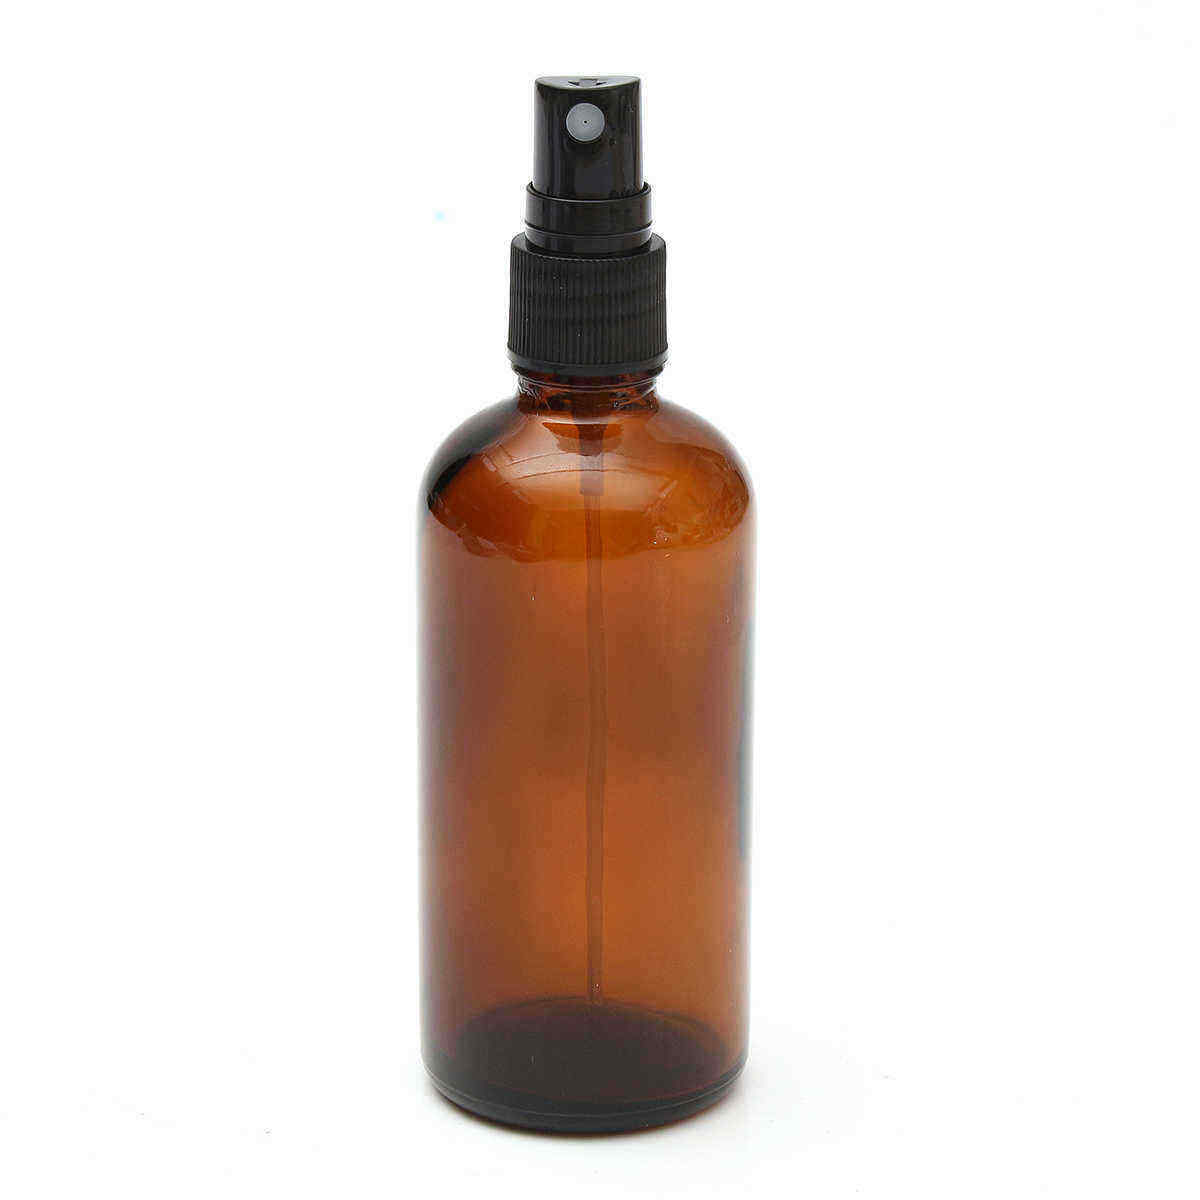 100ml-Refillable-Glass-Spray-Bottle-Atomizer-Liquid-Container-Travel-Makeup-Sample-Lotion-1143199